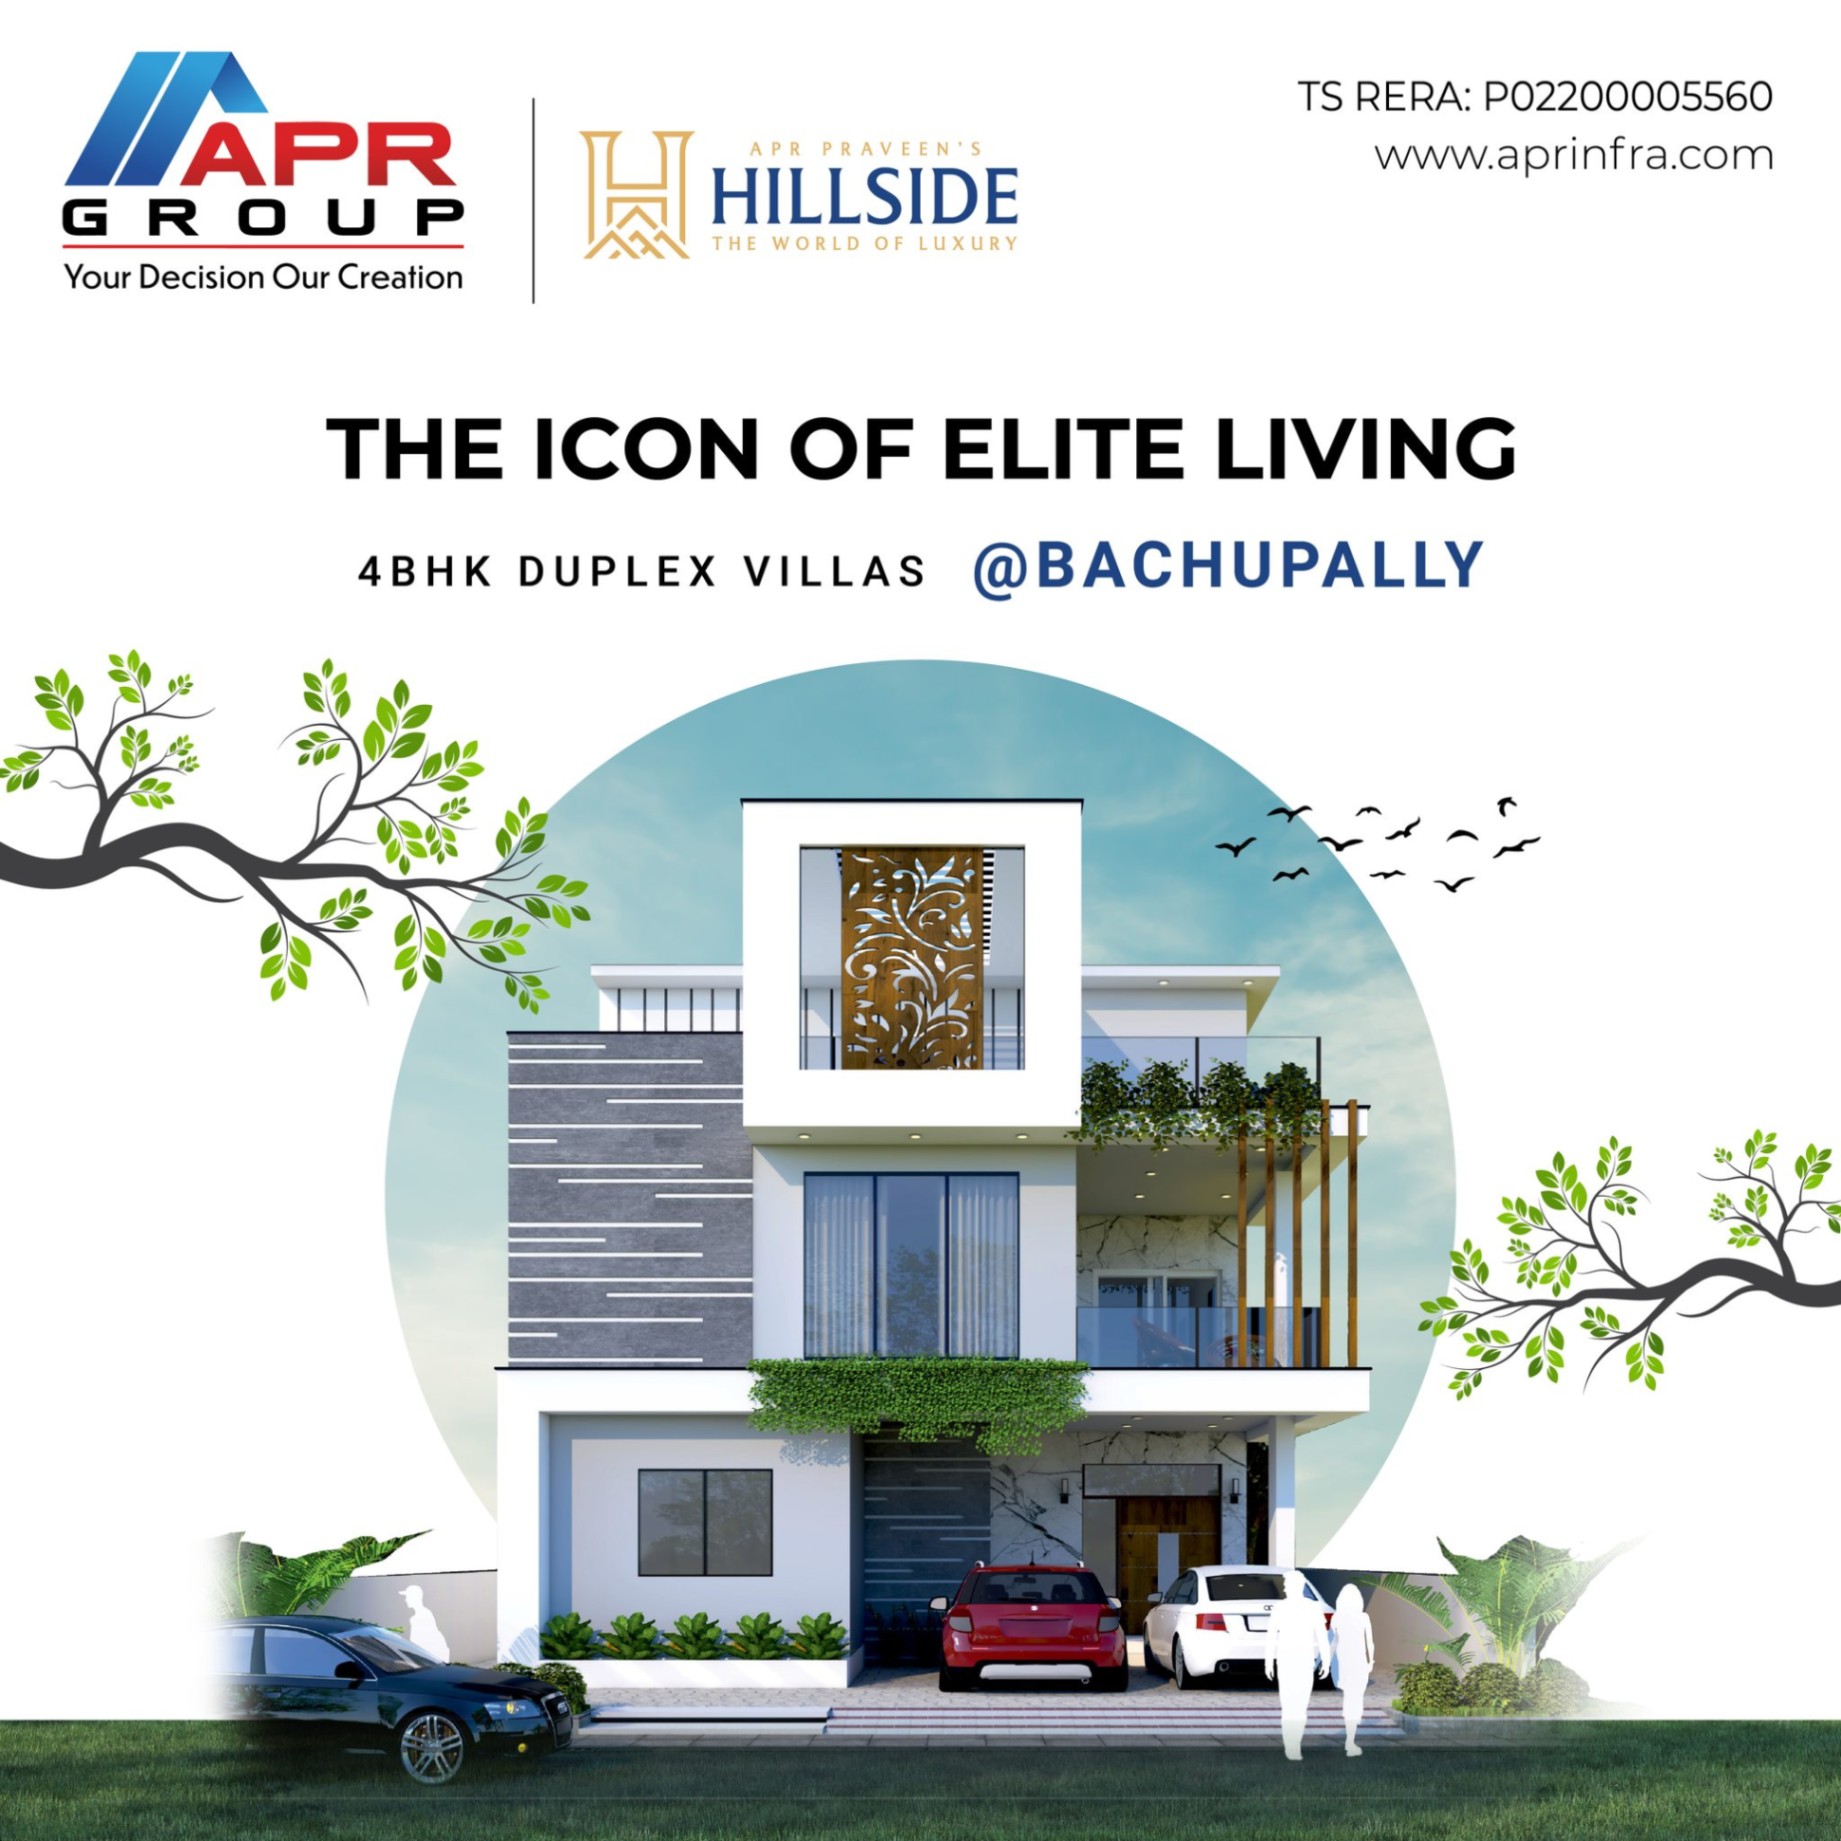 3 Bed/ 3 Bath Sell House/ Bungalow/ Villa; 1,785 sq. ft. carpet area; 6,685 sq. ft. lot for sale @Bachupally, hyderabad, bachupally